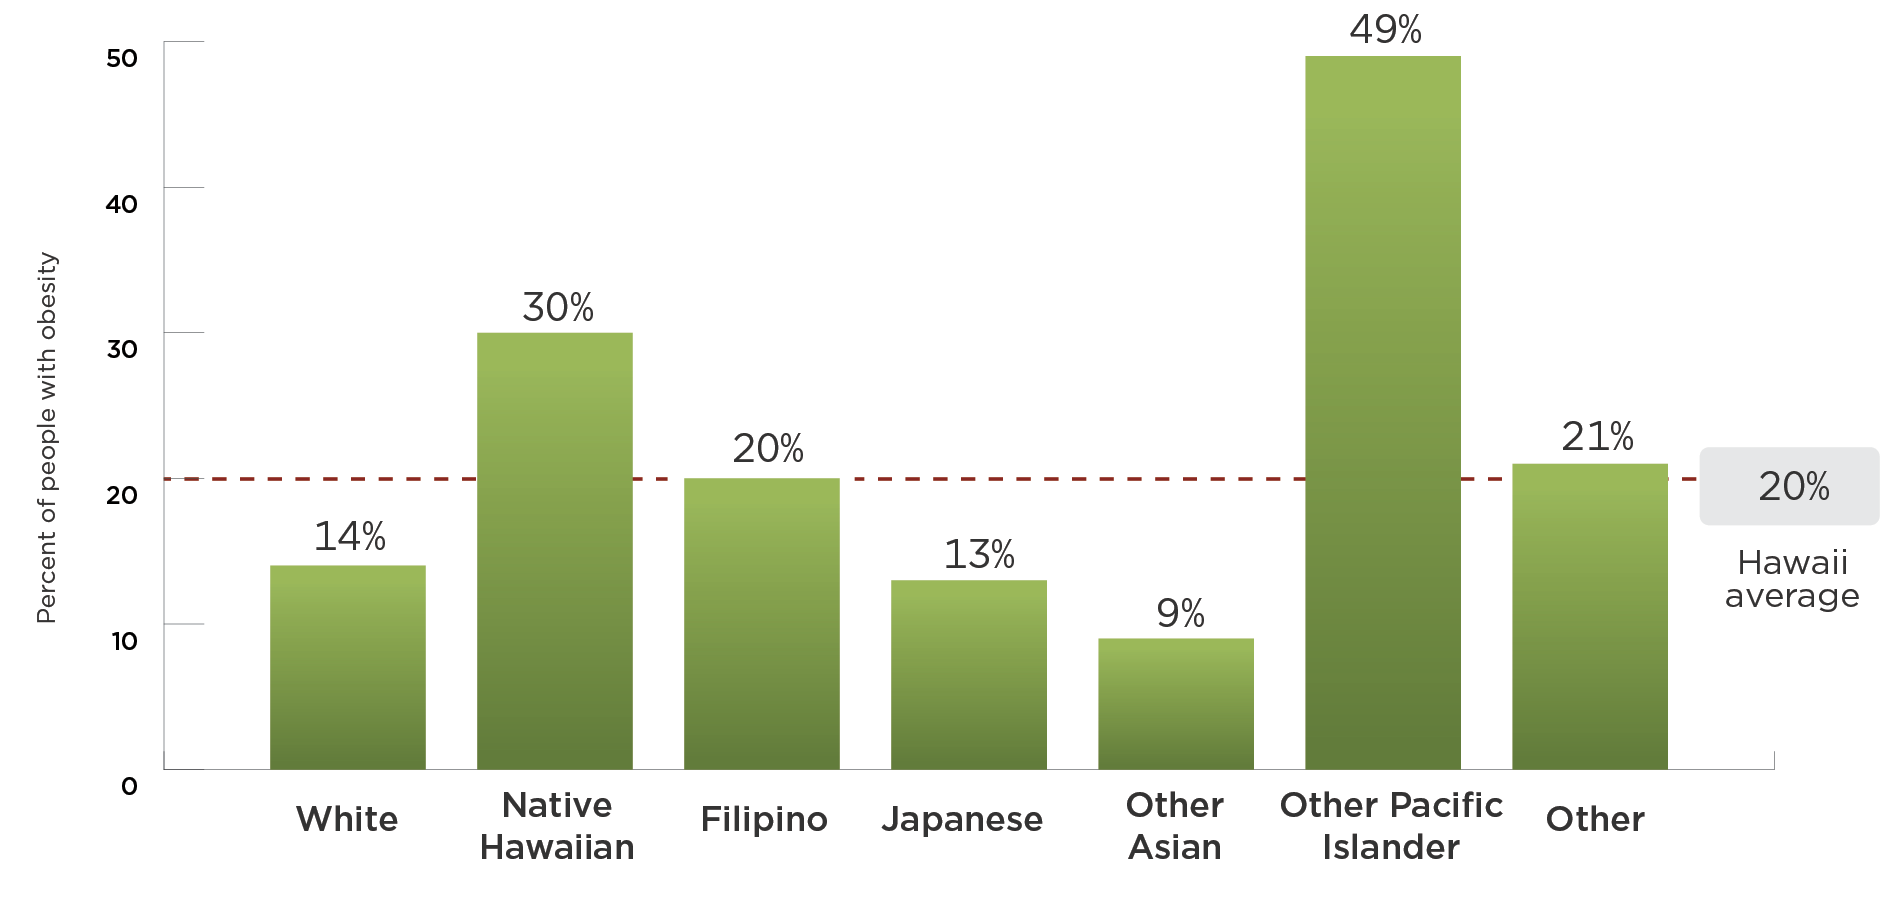 14% of White residents have obesity; 30% of Native Hawaiian residents have obesity; 20% of Filipino residents have obesity; 13% of Japanese residents have obesity; 9% of Other Asian residents have obesity; 49% of Pacific Islander residents have obesity; 21% of residents of Other races have obesity; On average, 20% of Hawaii residents have obesity